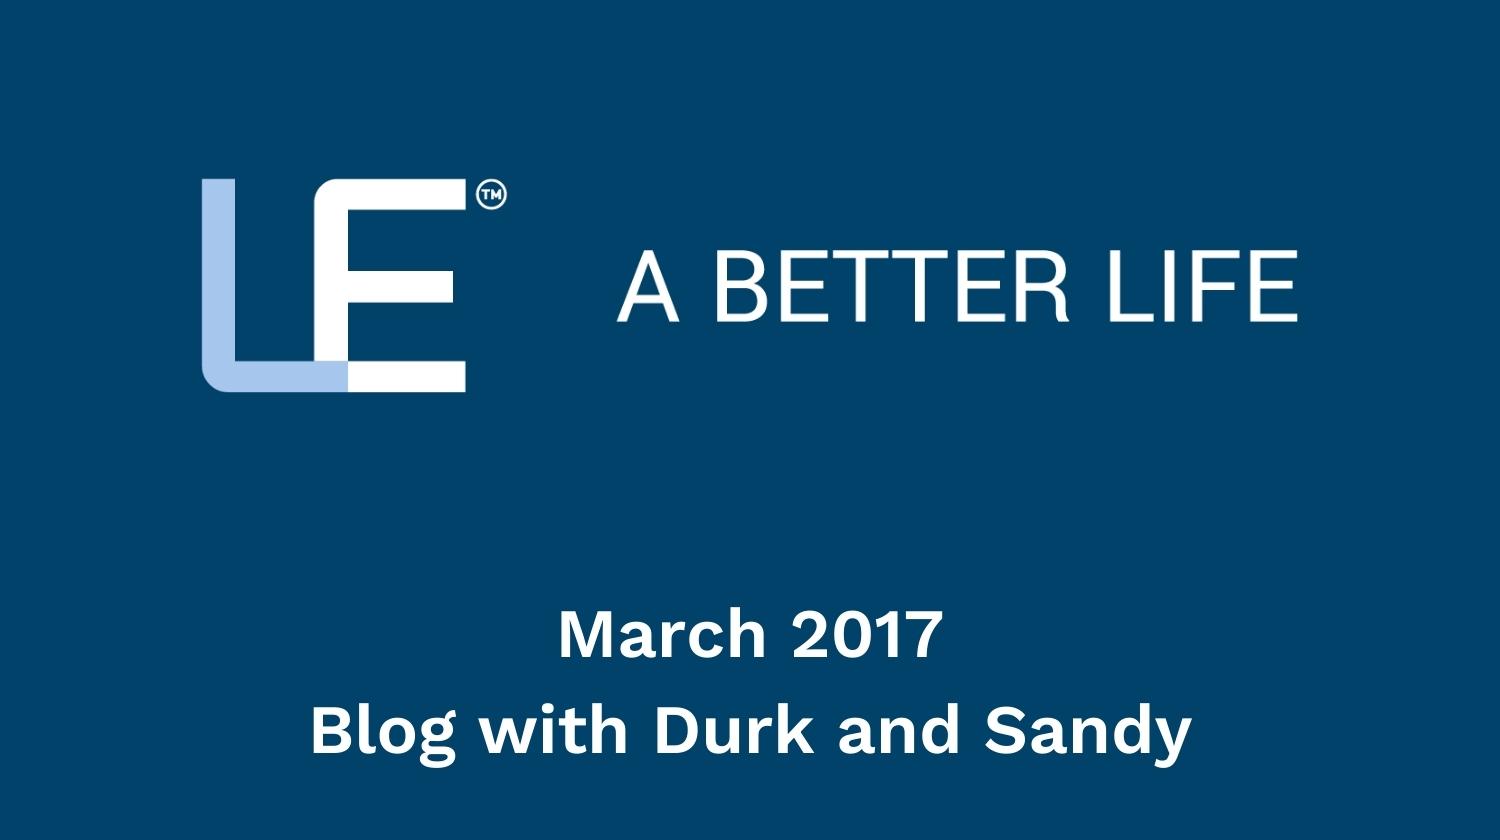 March 2017 Blog with Durk and Sandy